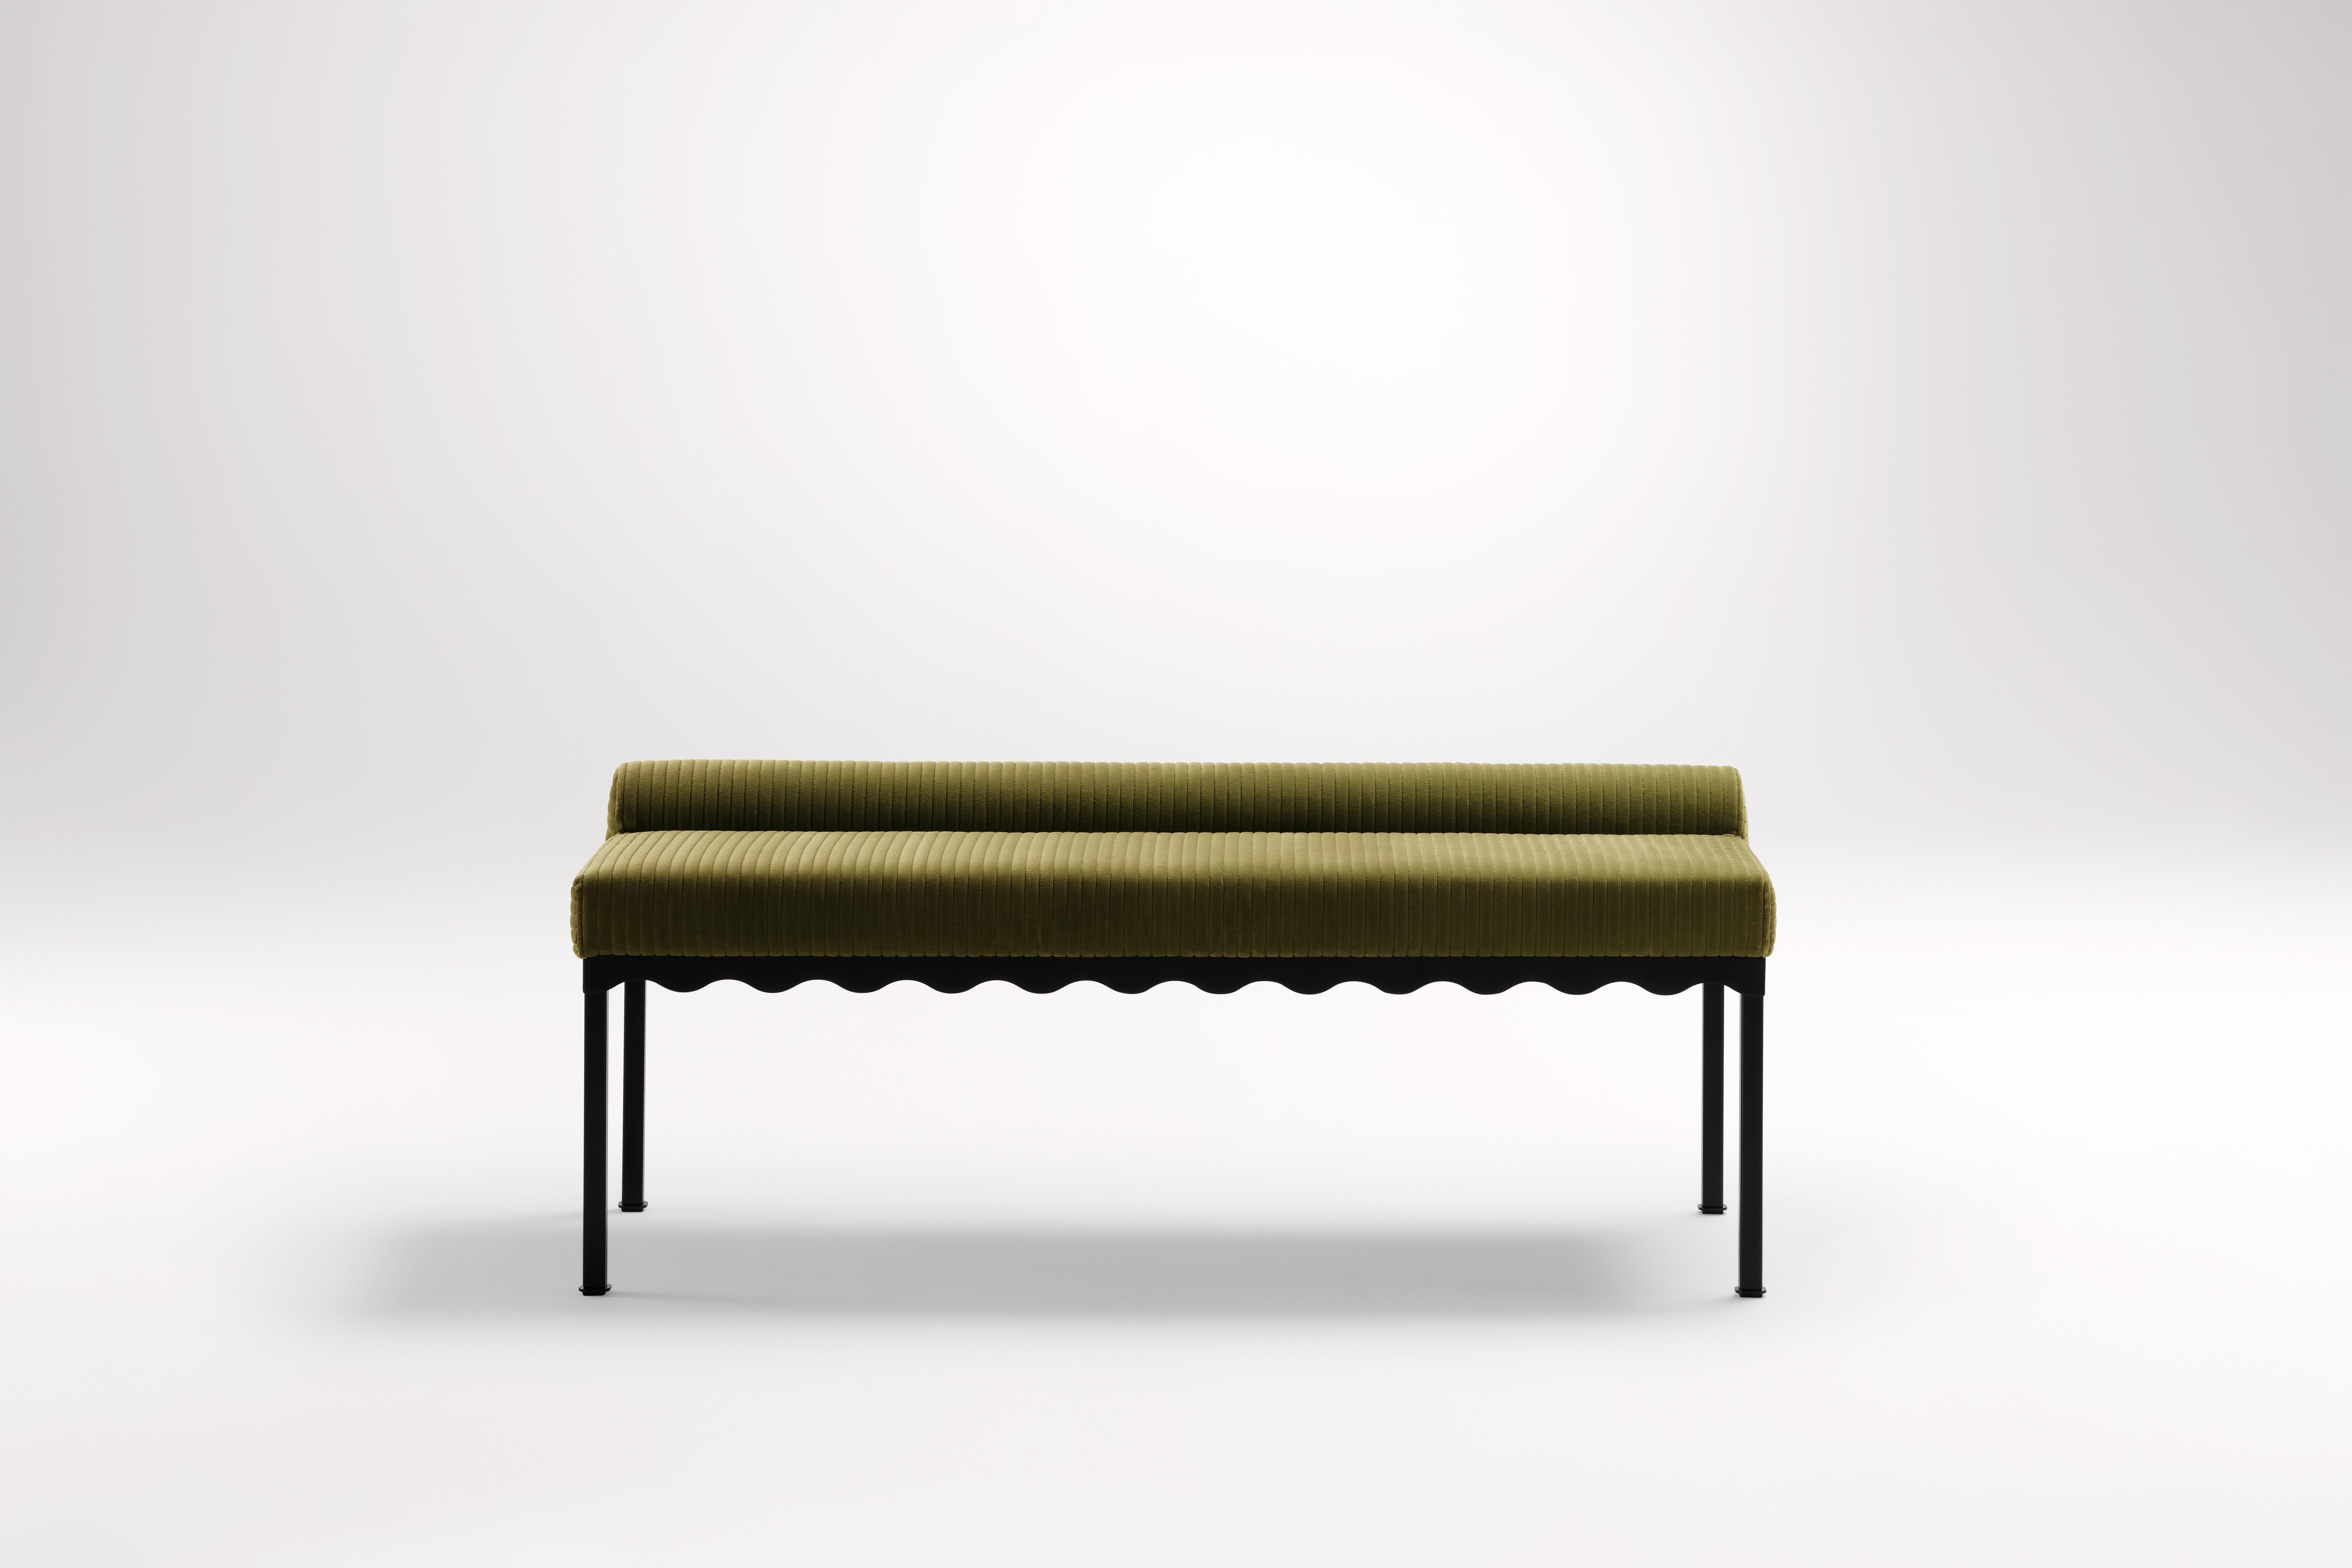 Oleander Bellini 1340 Bench by Coco Flip
Dimensions: D 134 x W 54 x H 52.5 cm
Materials: Timber / Upholstered tops, Powder-coated steel frame. 
Weight: 20 kg
Frame Finishes: Textura Black.

Coco Flip is a Melbourne based furniture and lighting